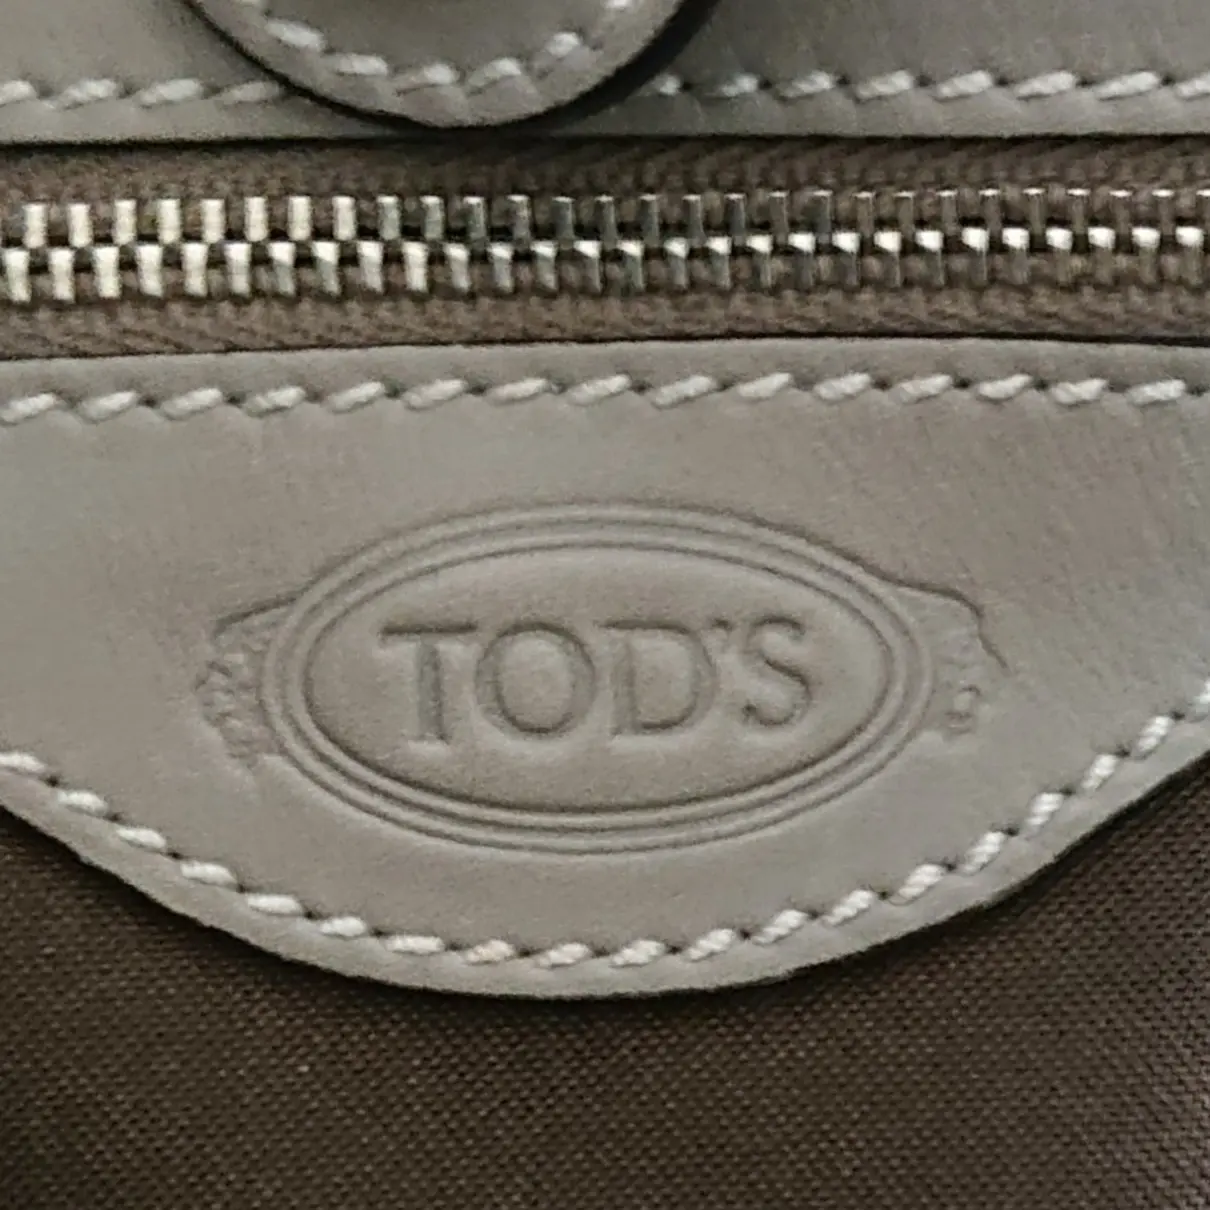 Leather tote Tod's